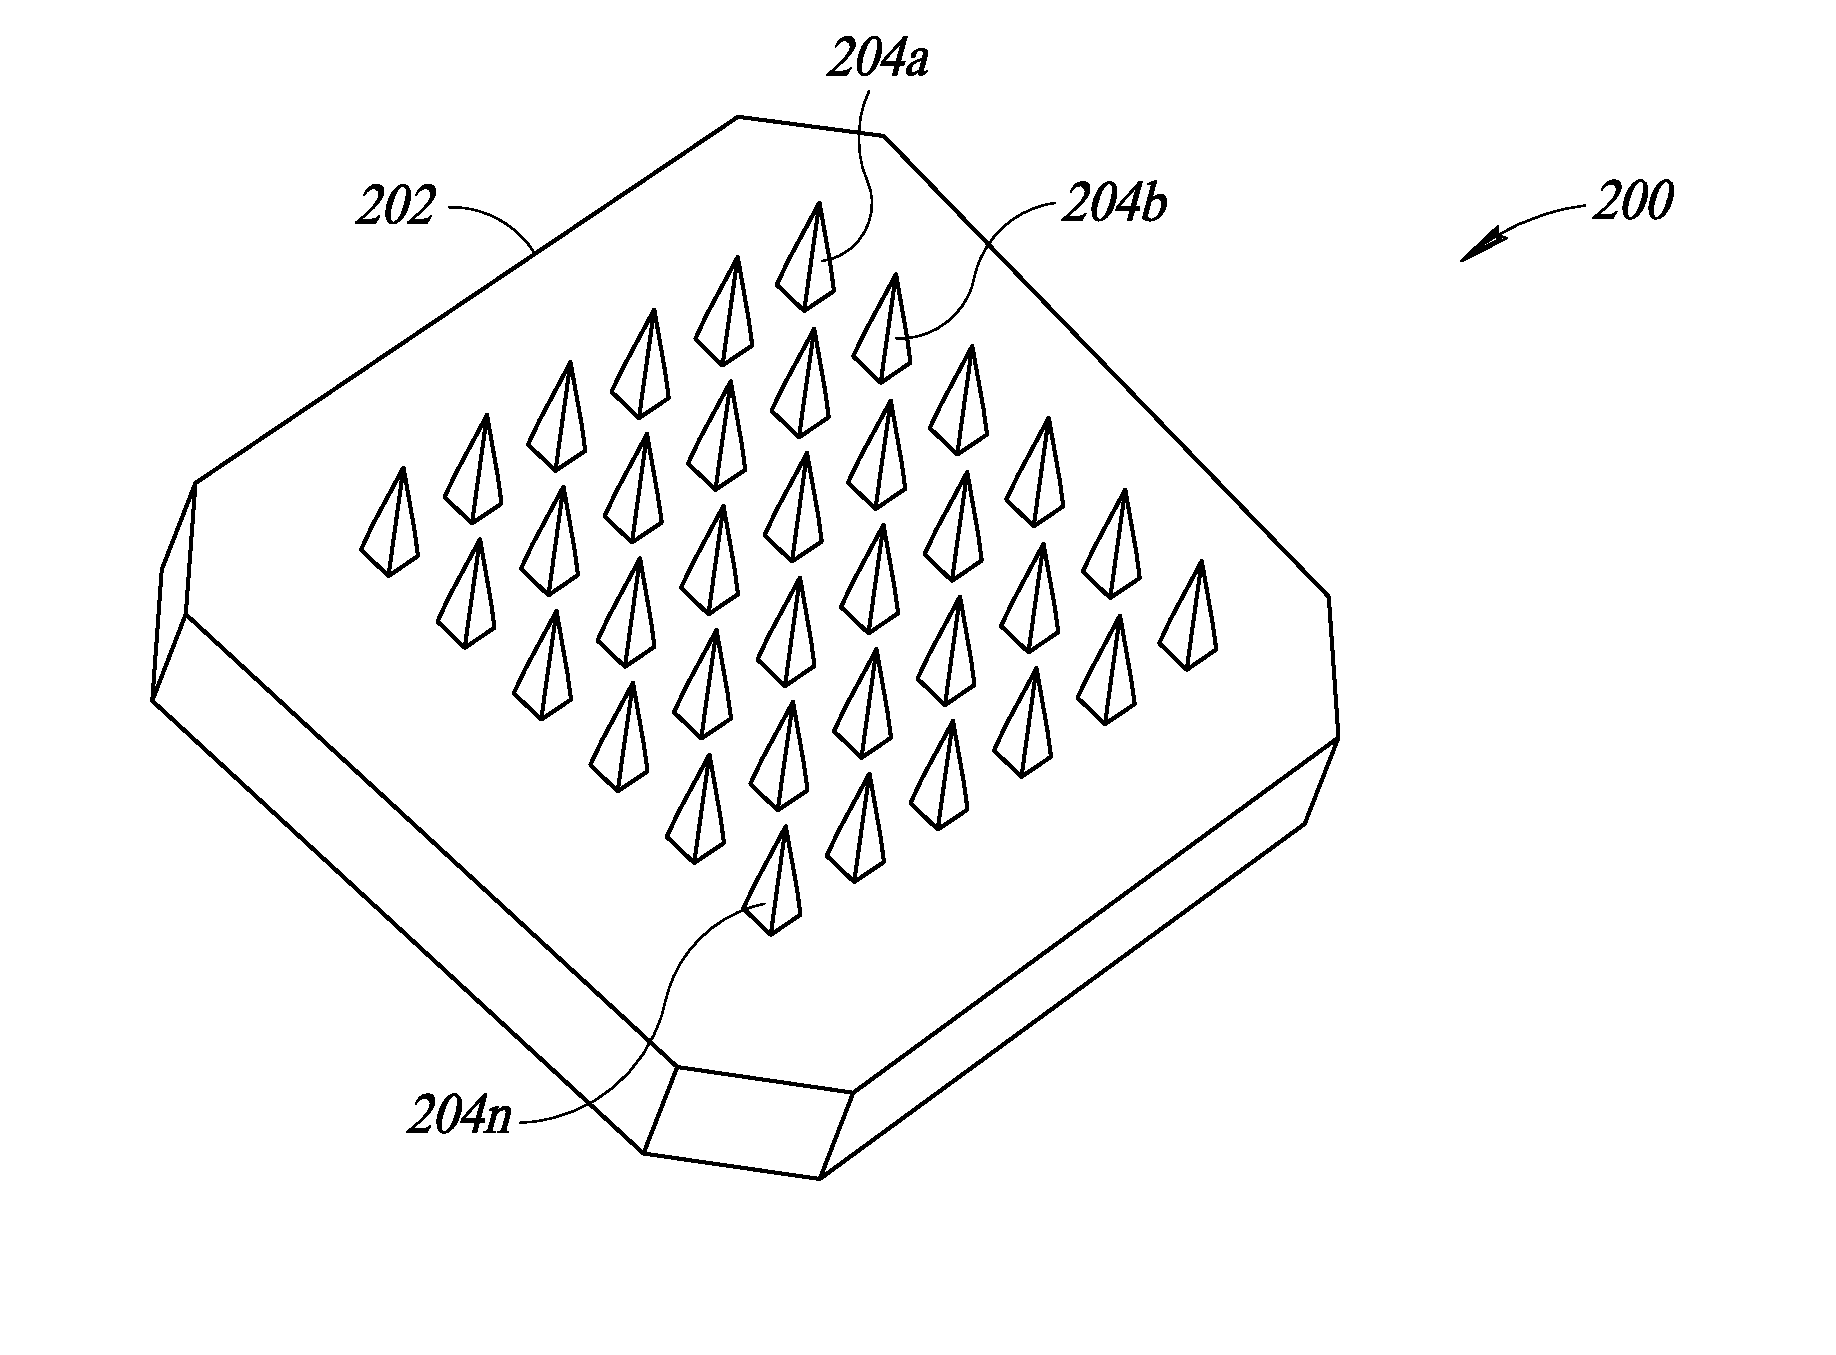 Device and method of skin care and treatment via microneedles having inherent anode and cathode properties, with or without cosmetic or pharmacological compositions